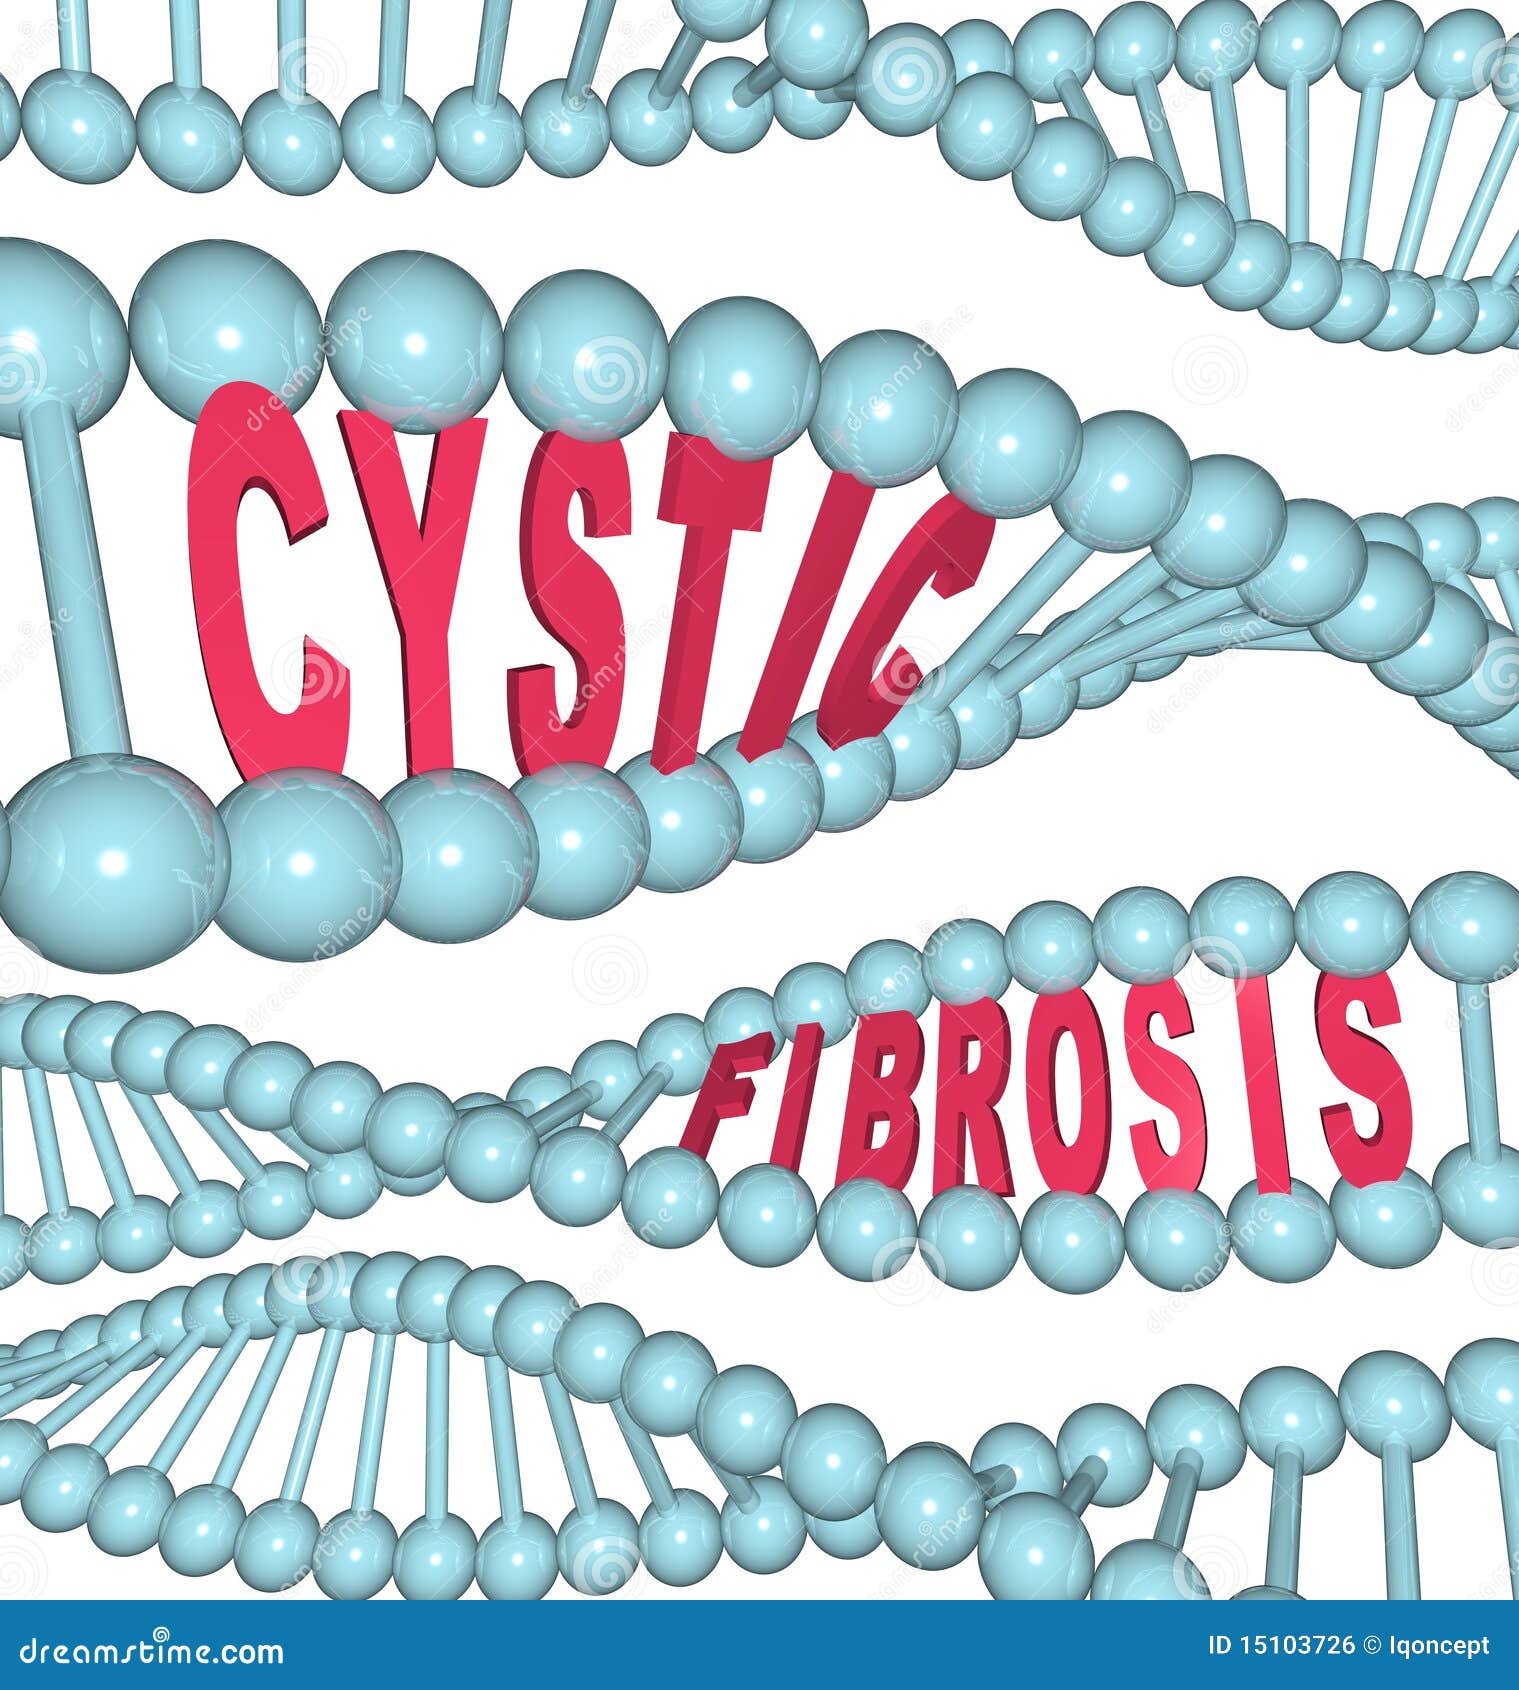 Cystic Fibrosis Awareness Month Background Or Banner Design Template ...